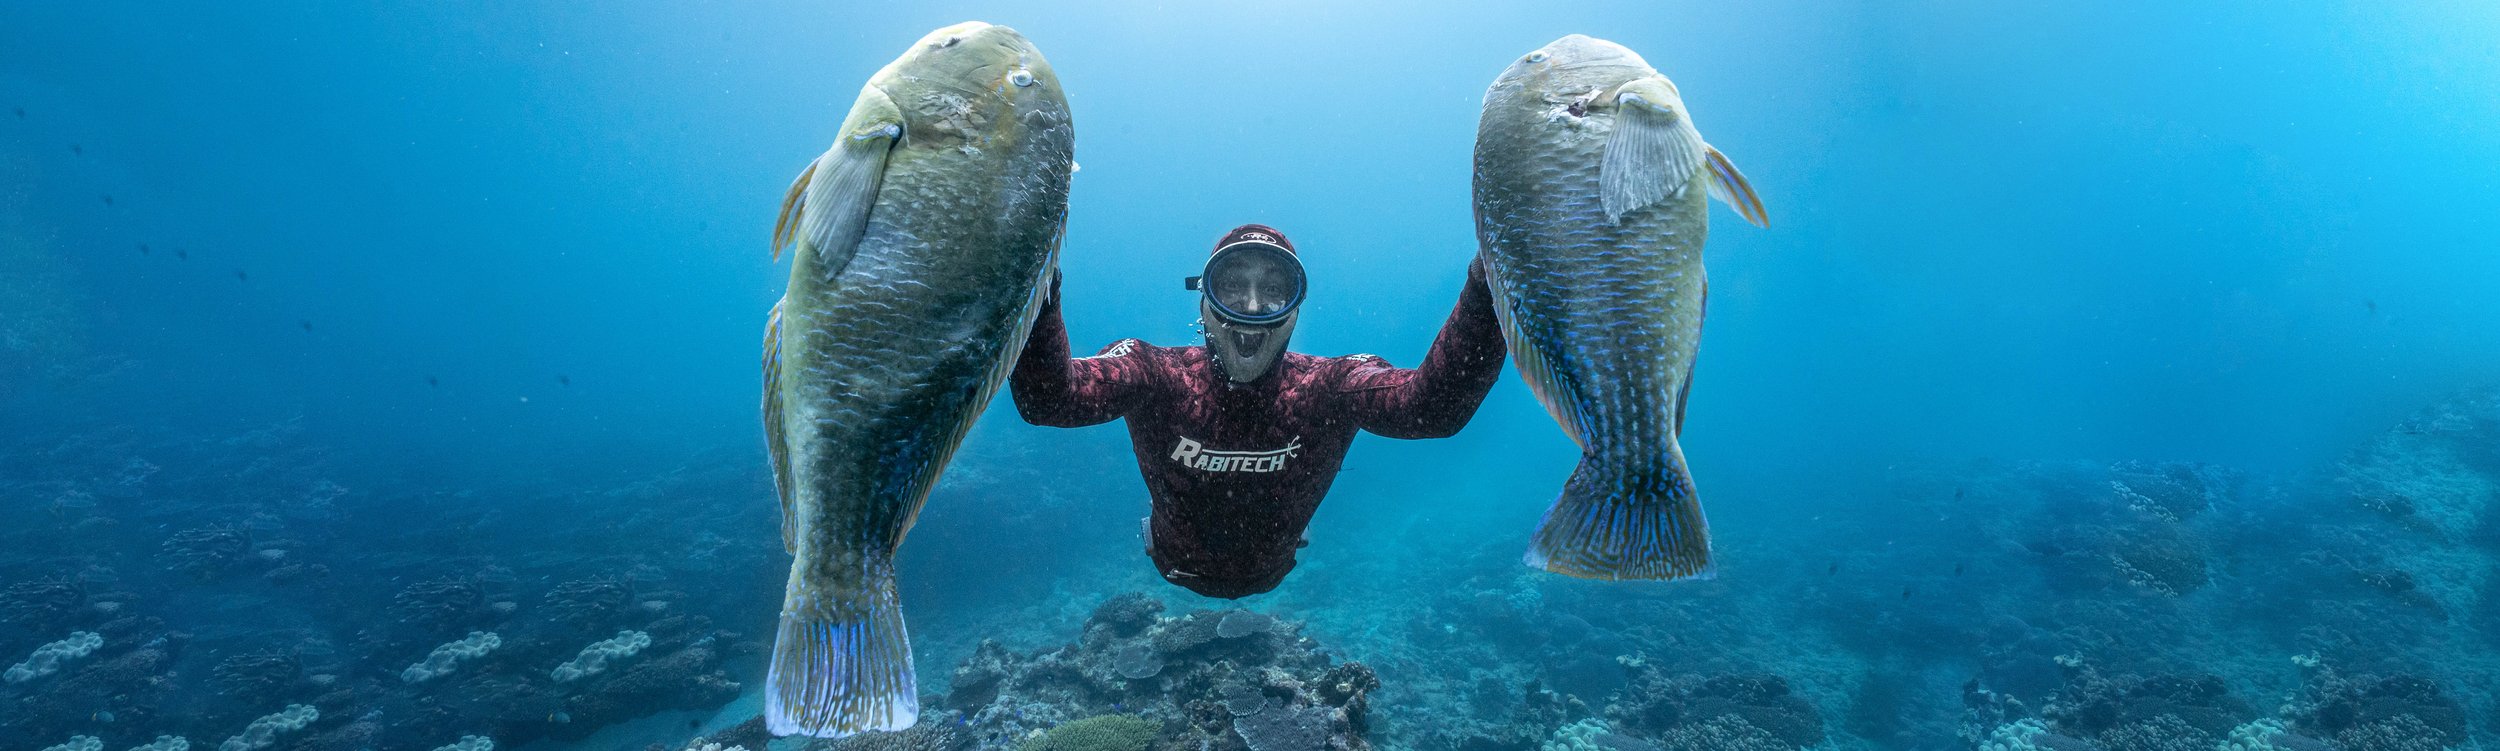 Freediving for Spearfishing - learn how to spearfish in a safe manner —  Freediving Family